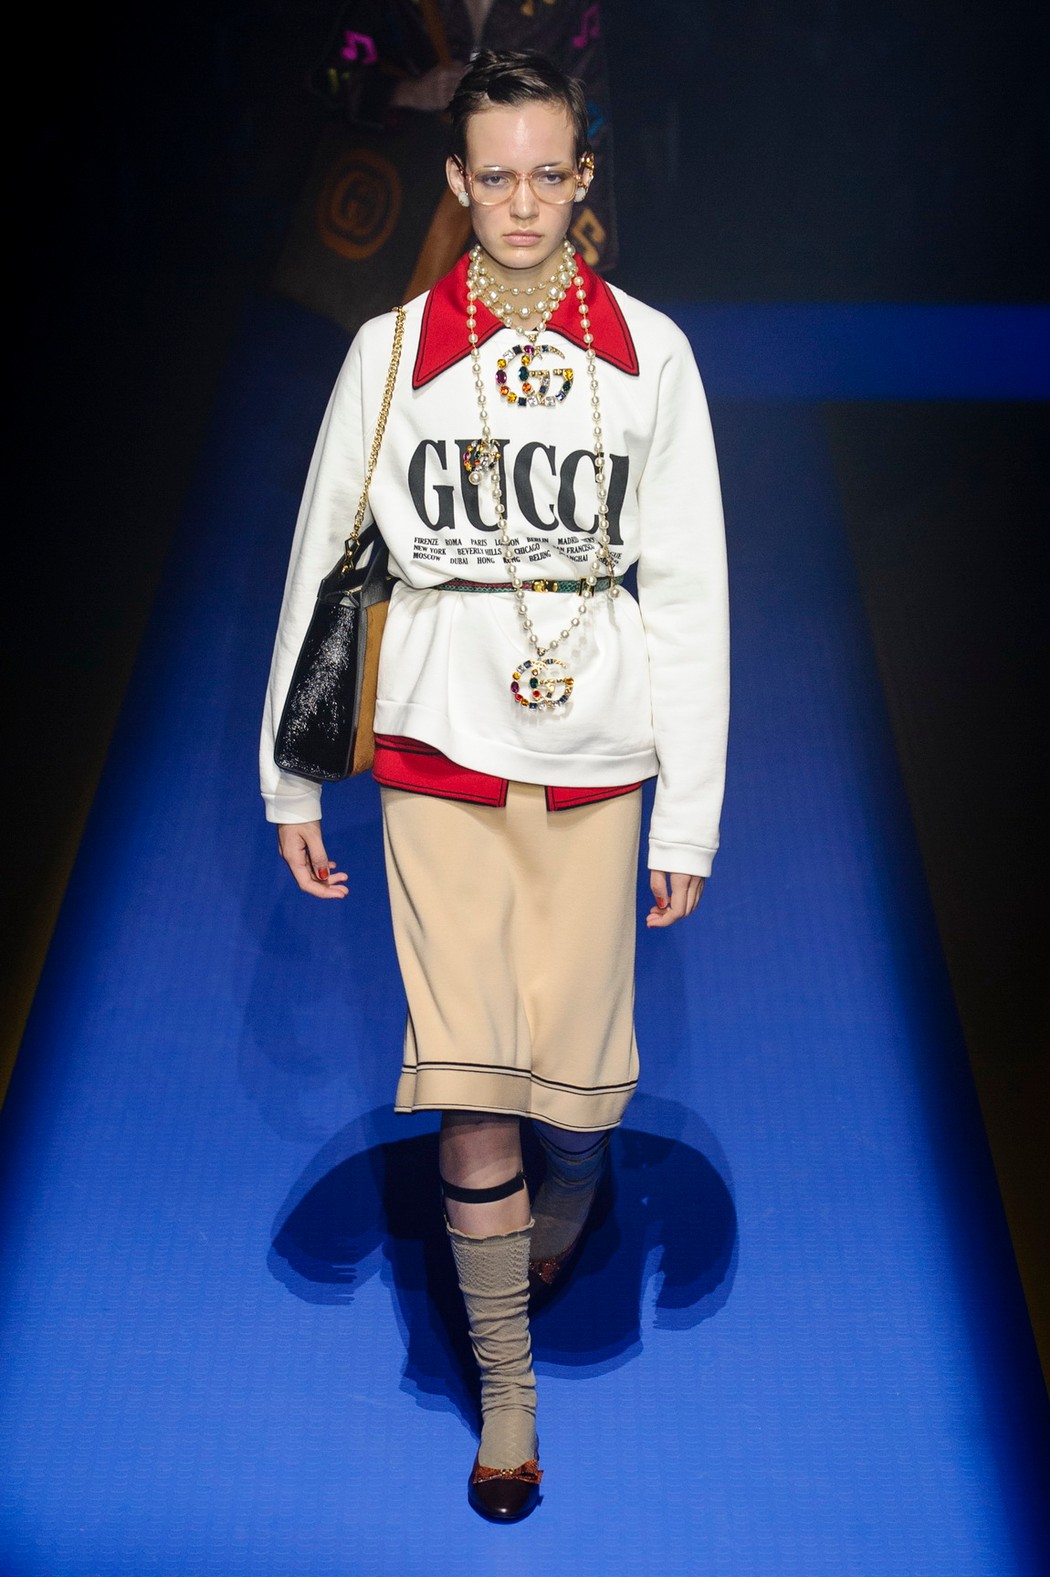 How Gucci Is Making a Comeback With Millennials and Teens